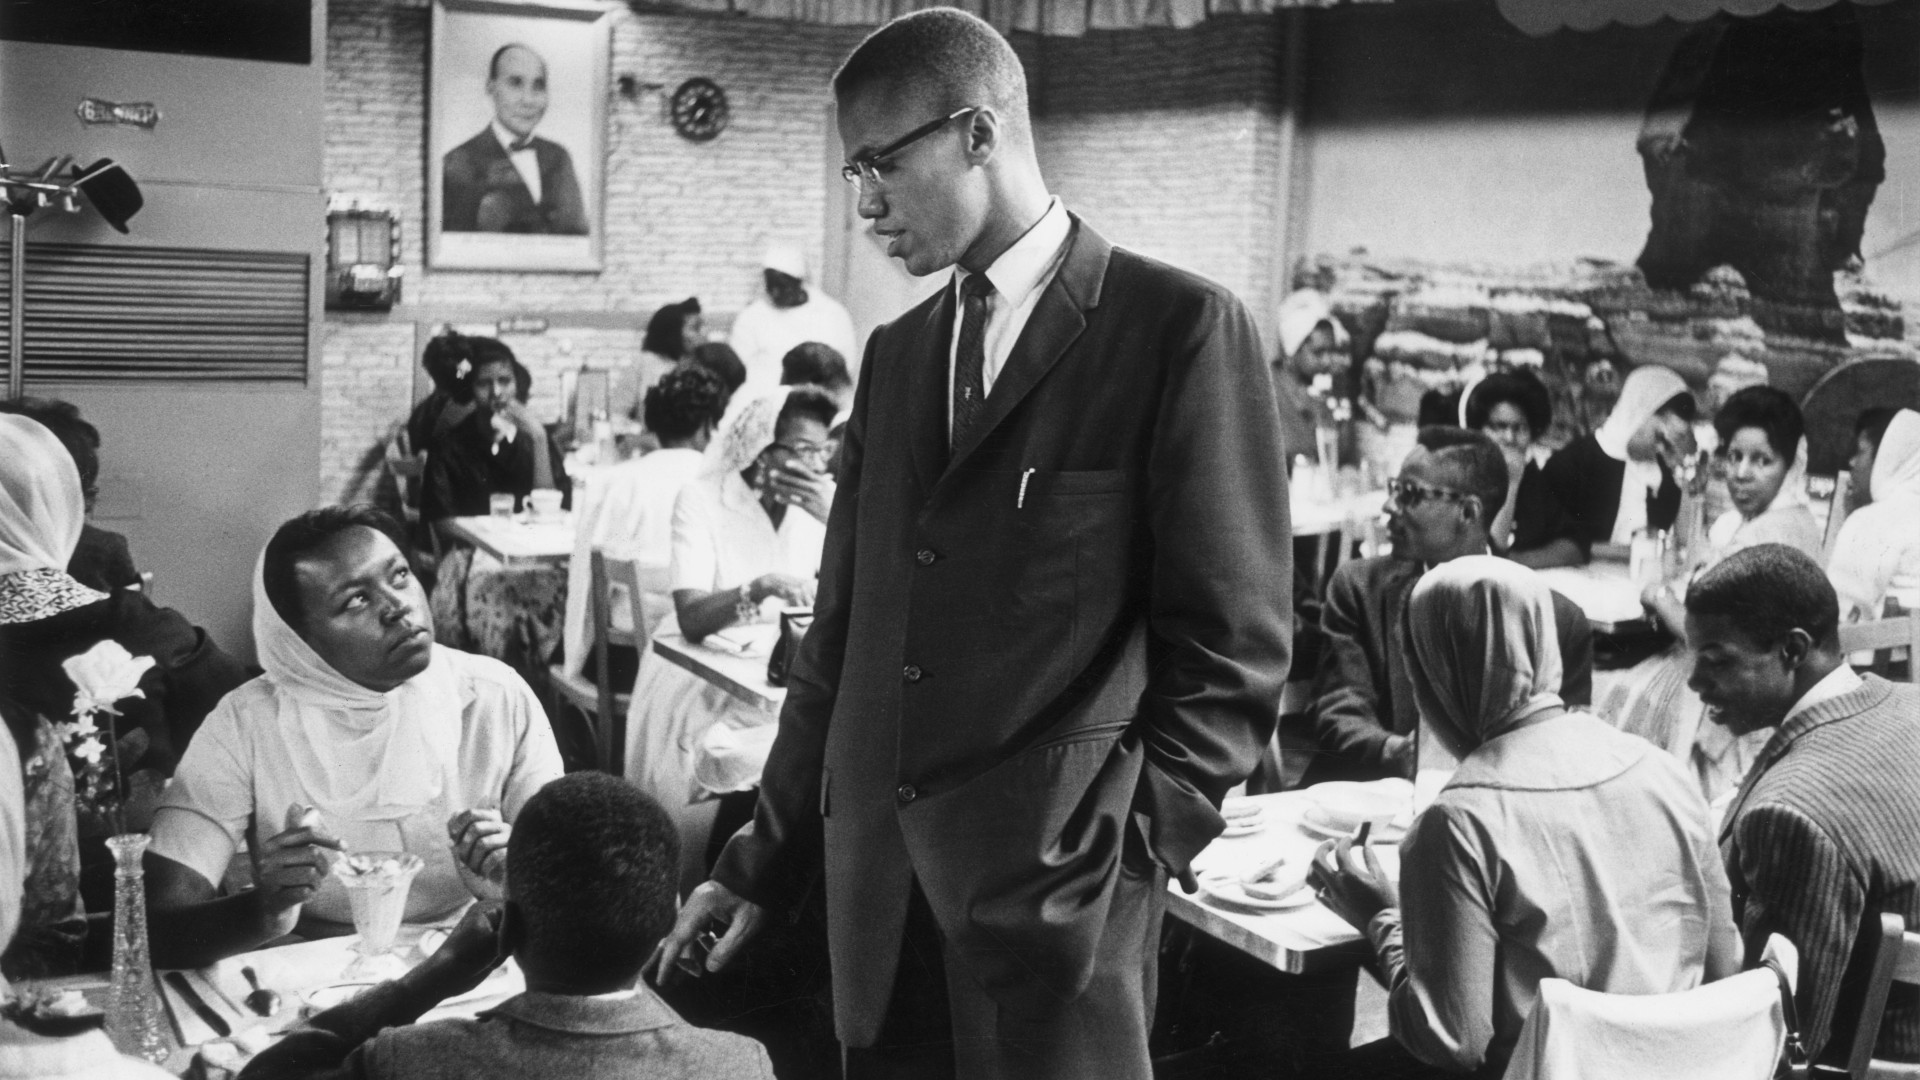 malcolm x and the nation of islam